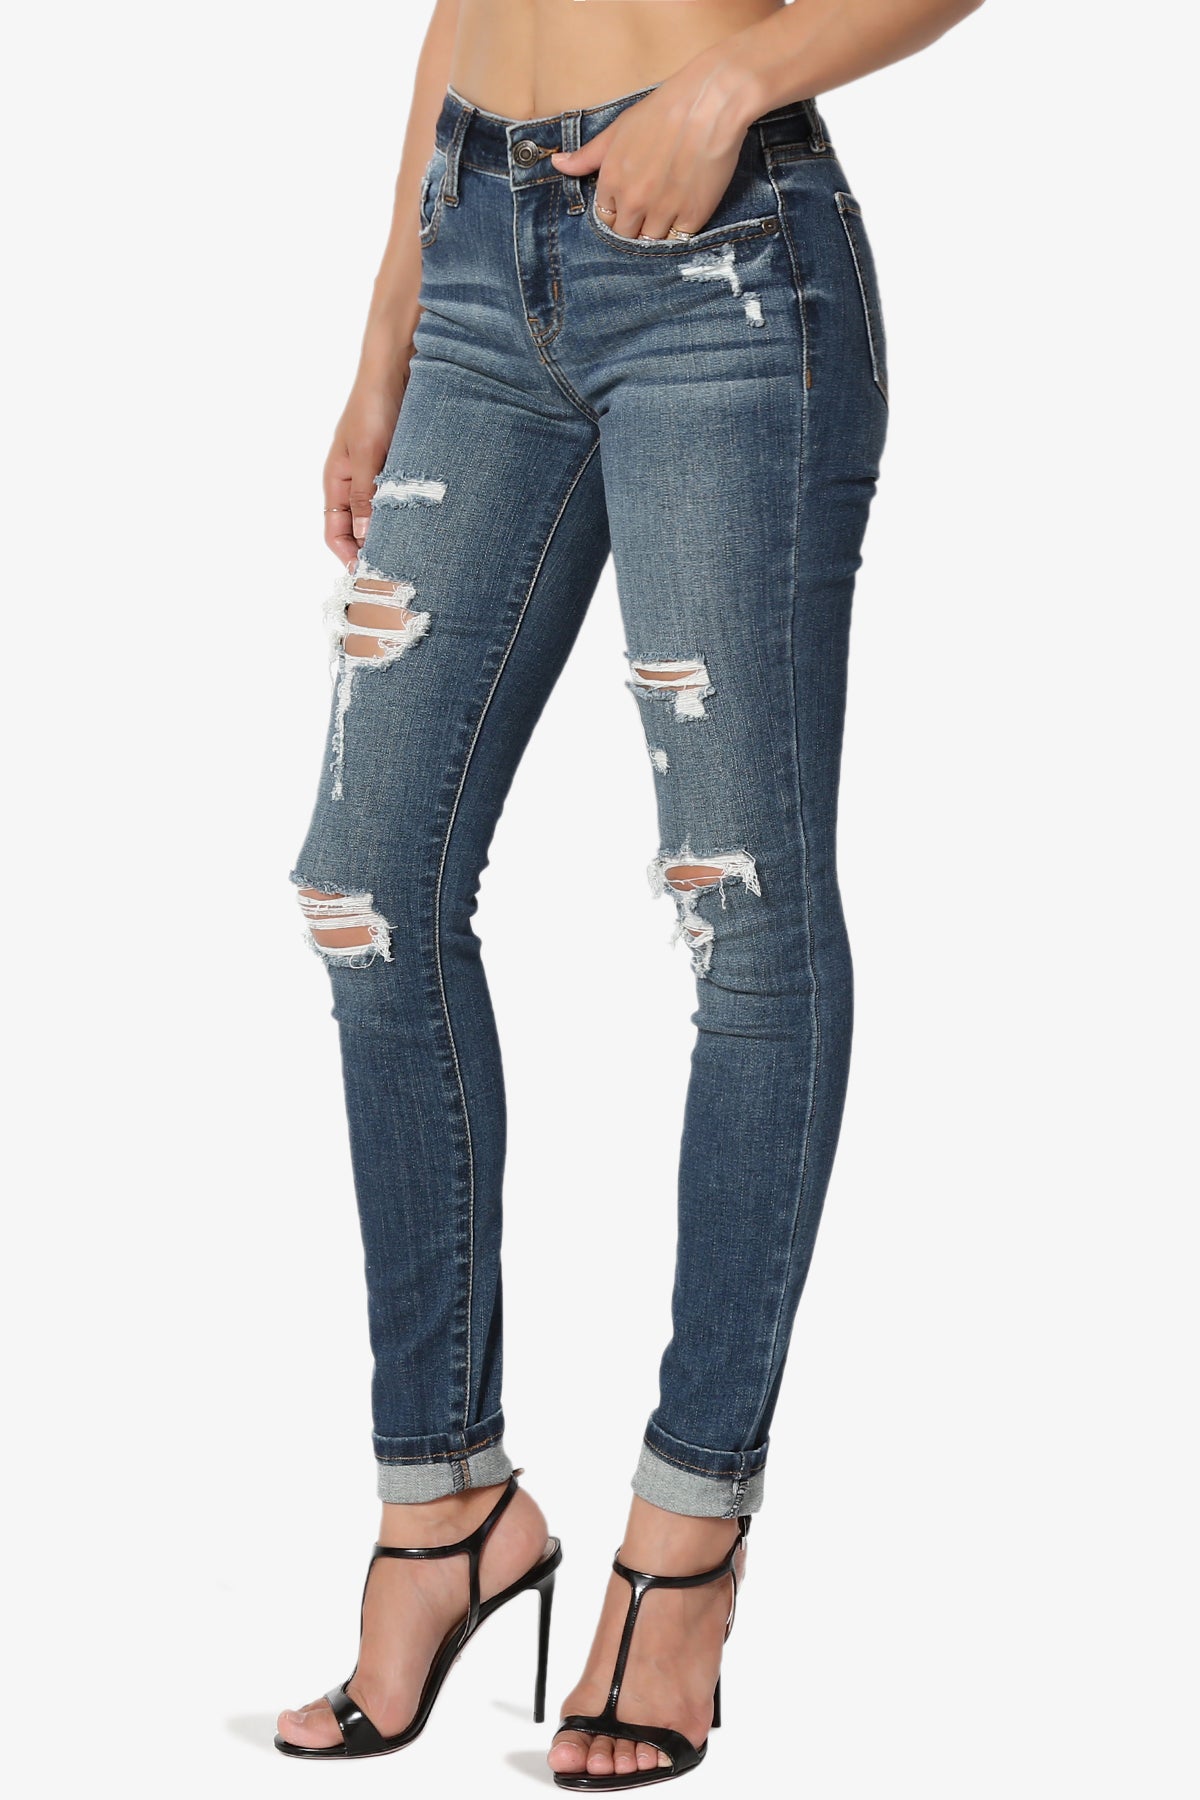 Load image into Gallery viewer, Jude Mid rise Anke Skinny Jeans in Suspect DK DARK_3
